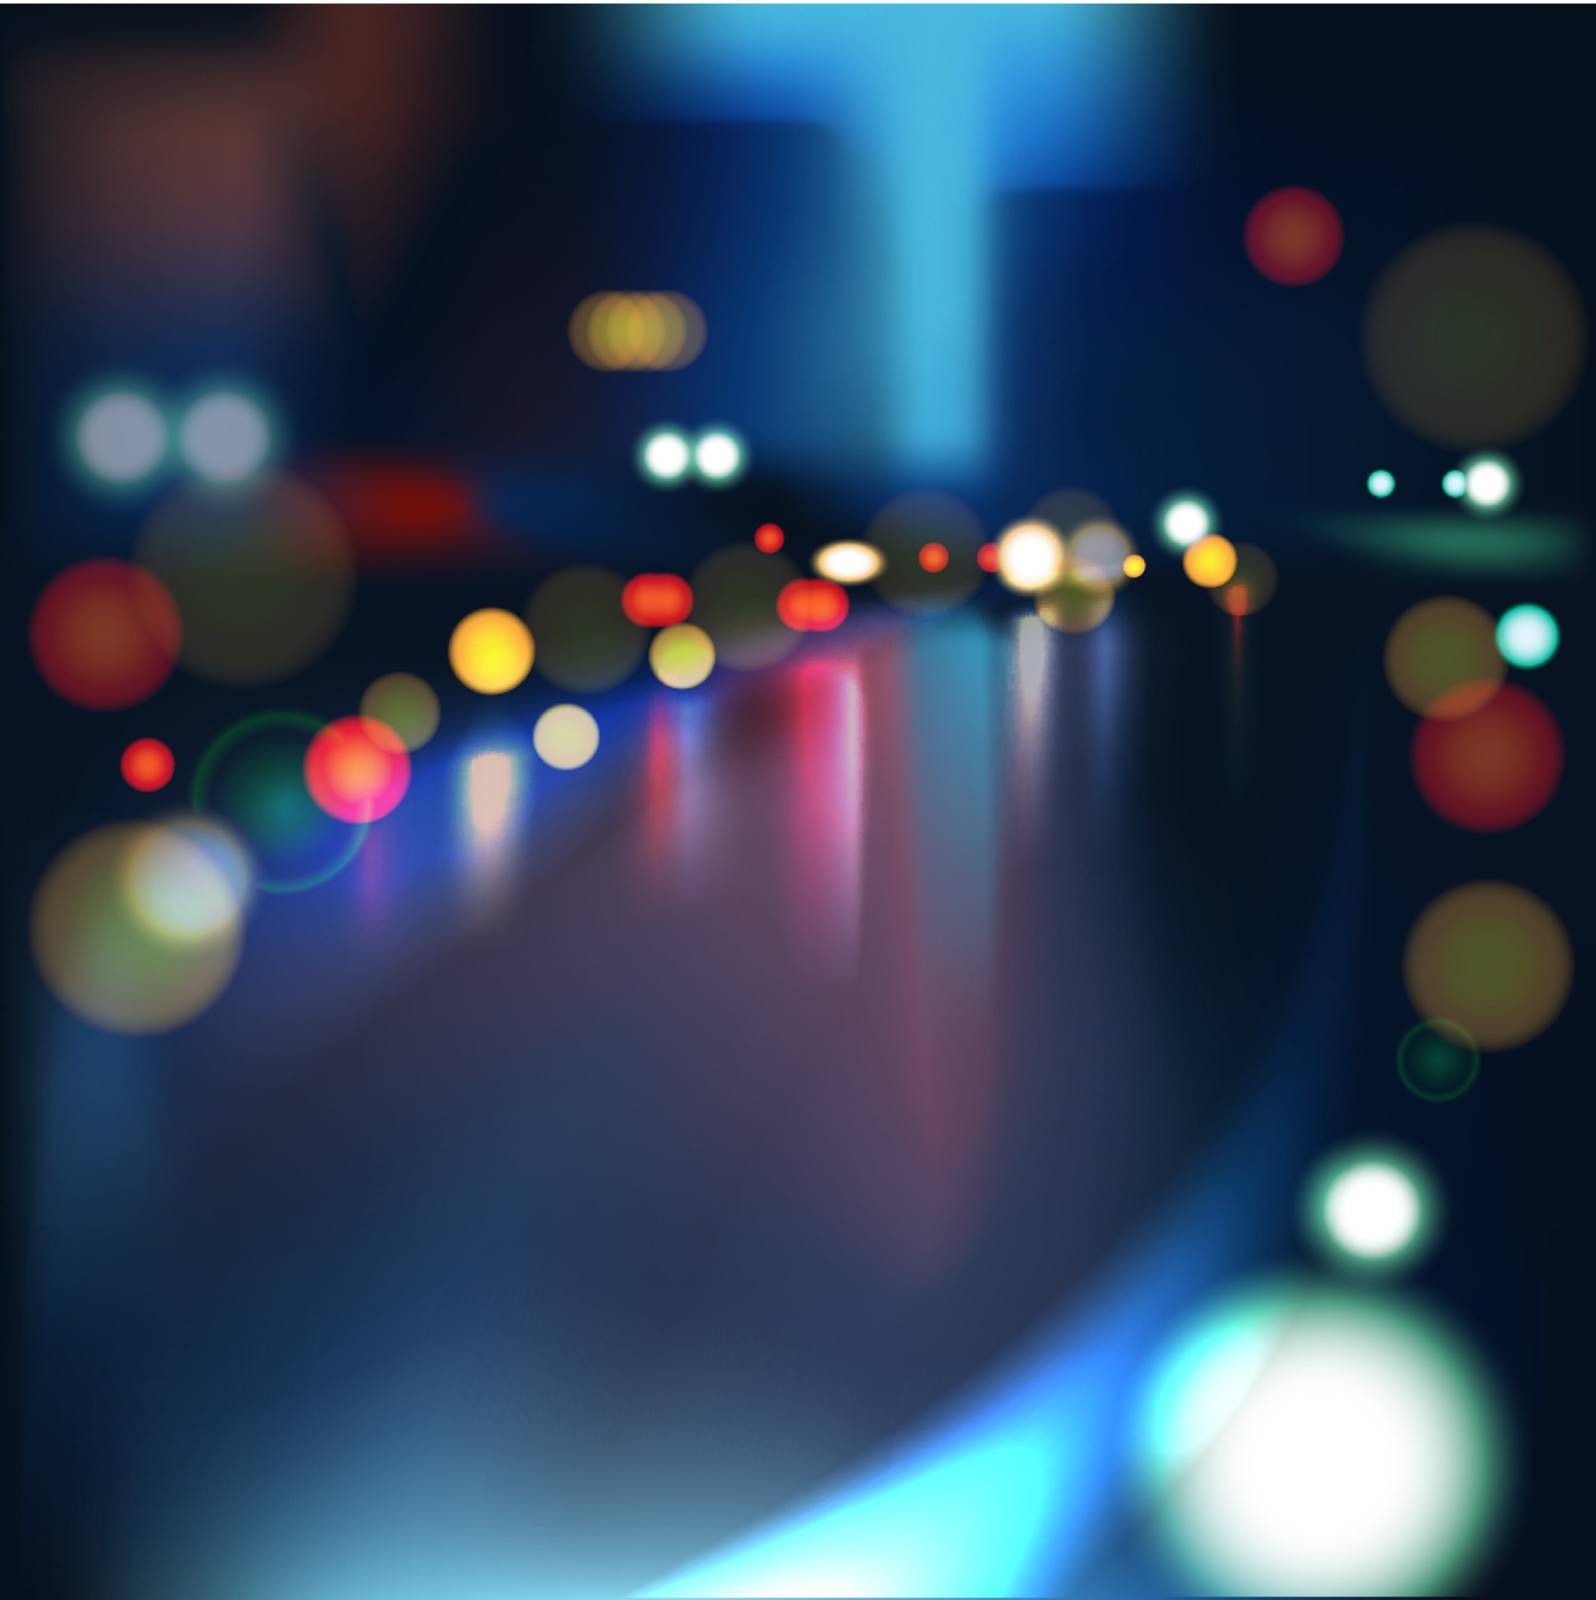 Blurred Defocused Lights of Heavy Traffic on a Wet Rainy City Road at Night. by ikopylov